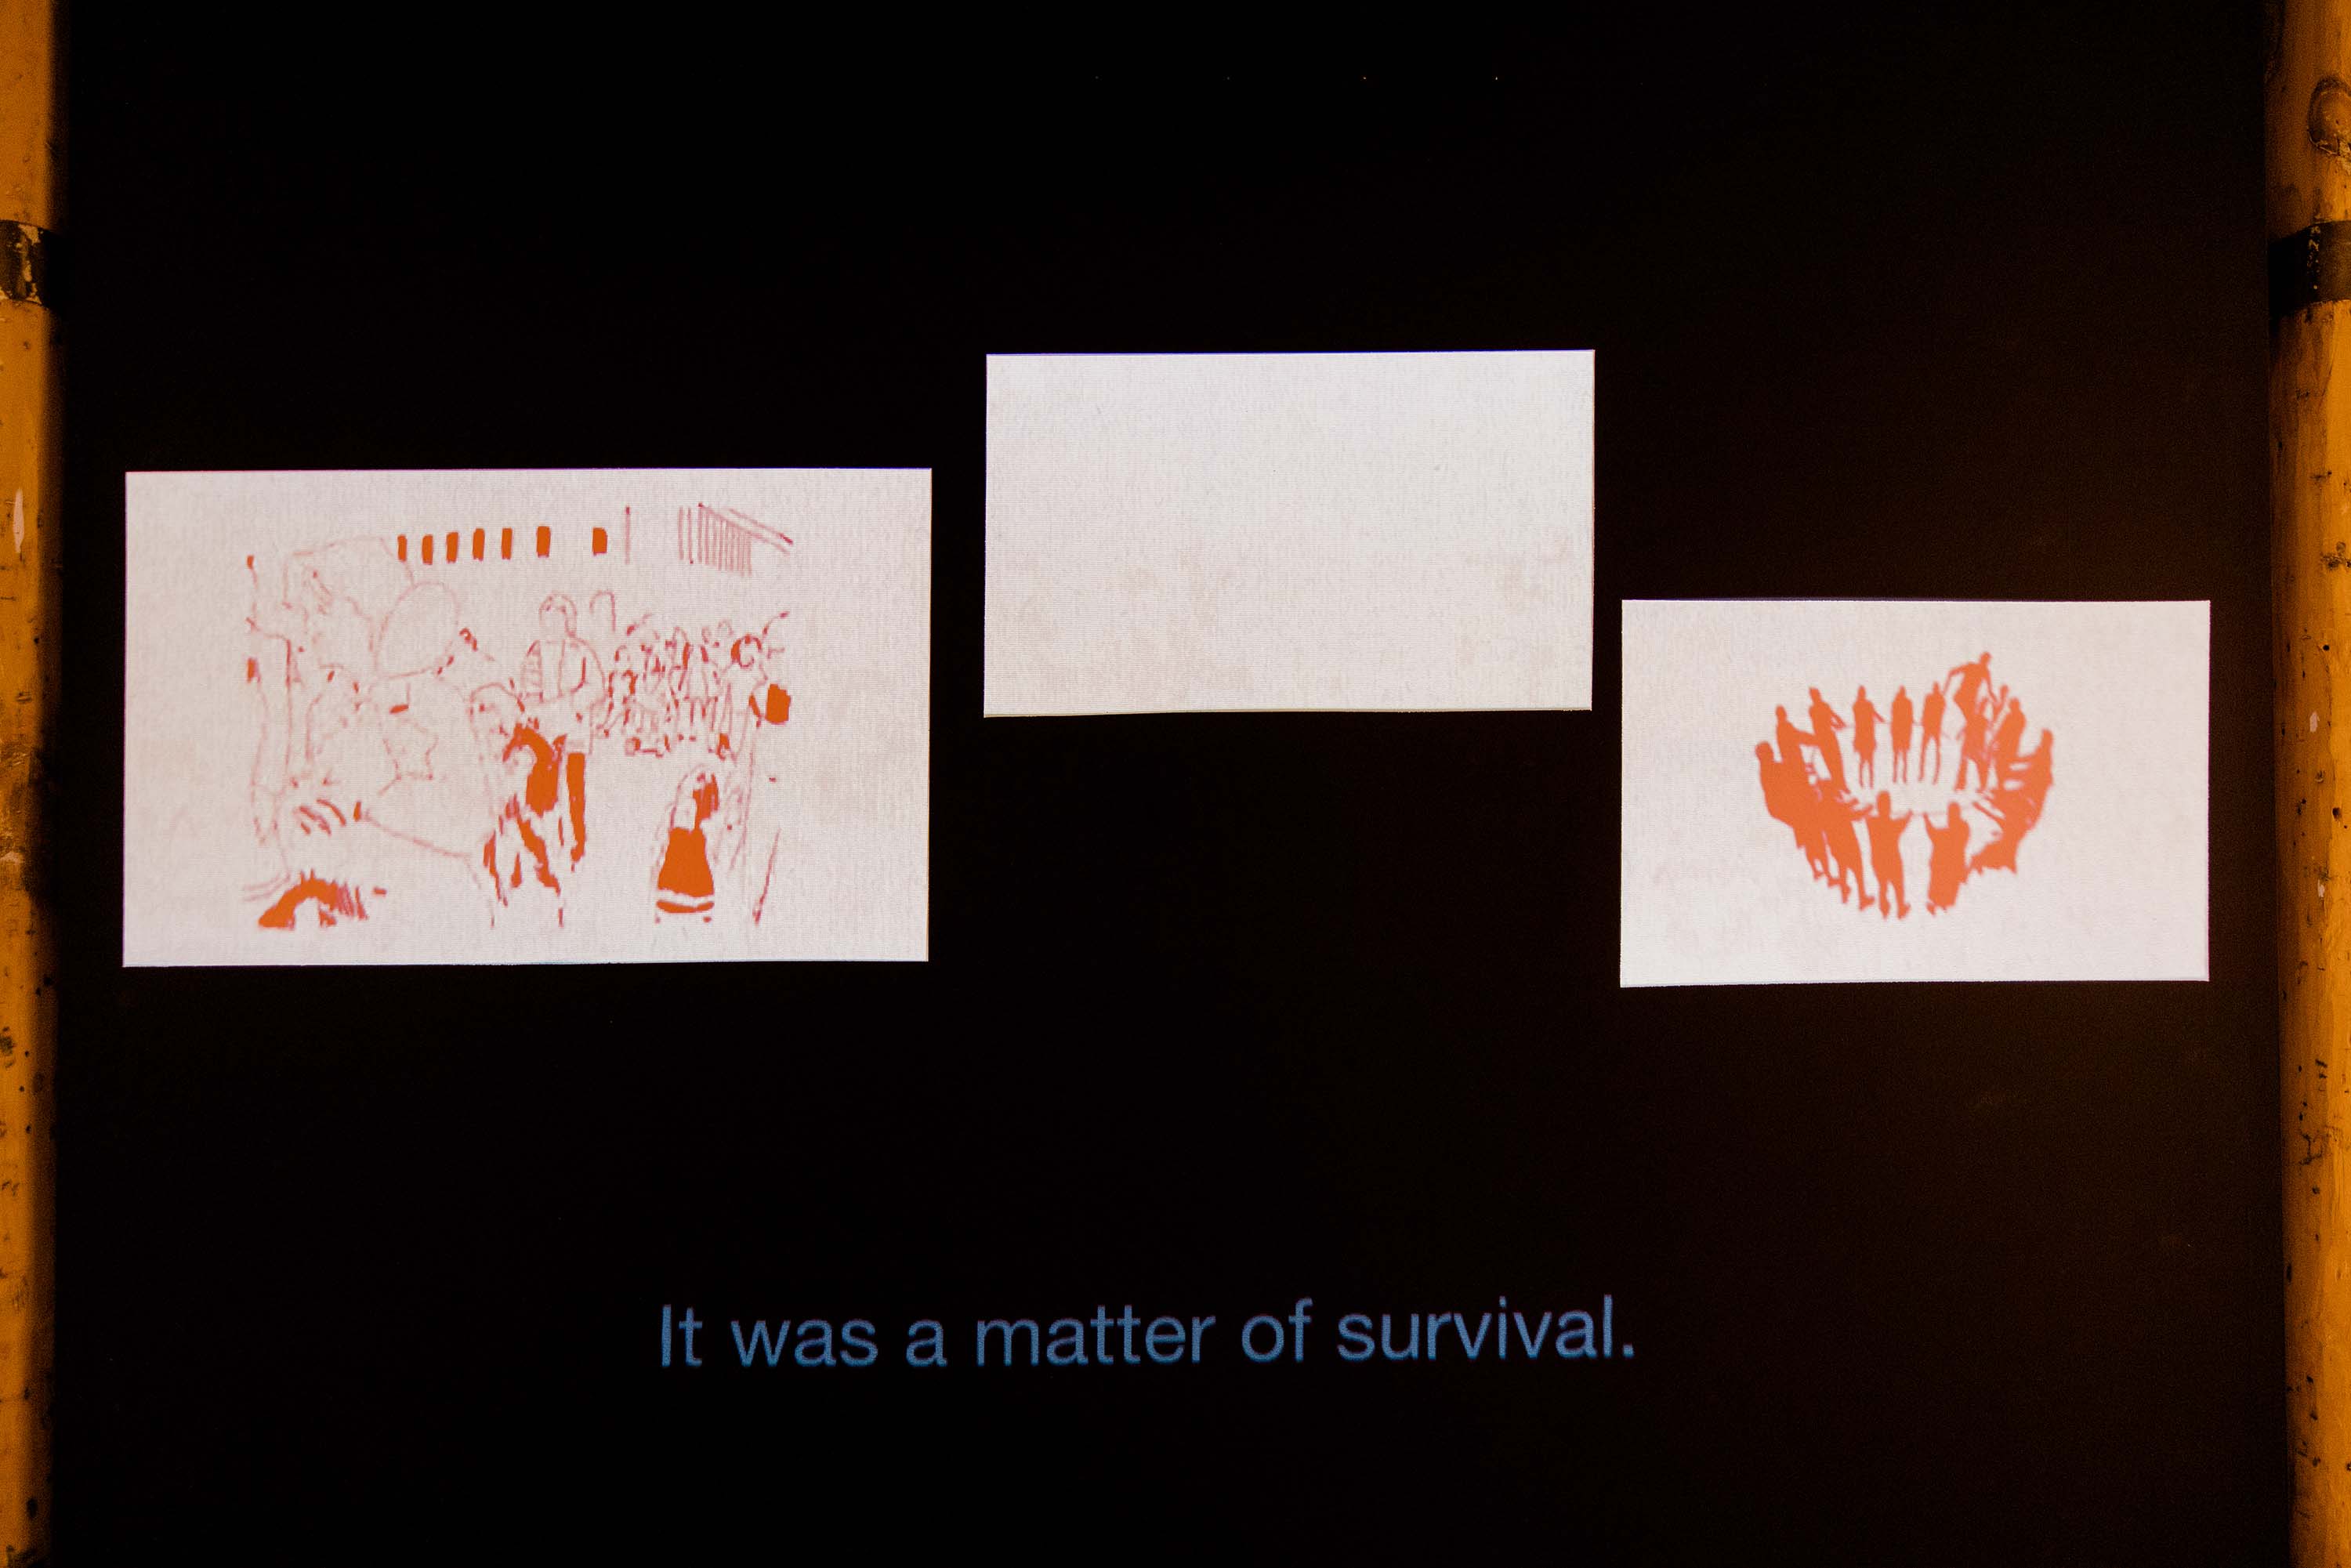 A video still showing two drawings of groups of people.